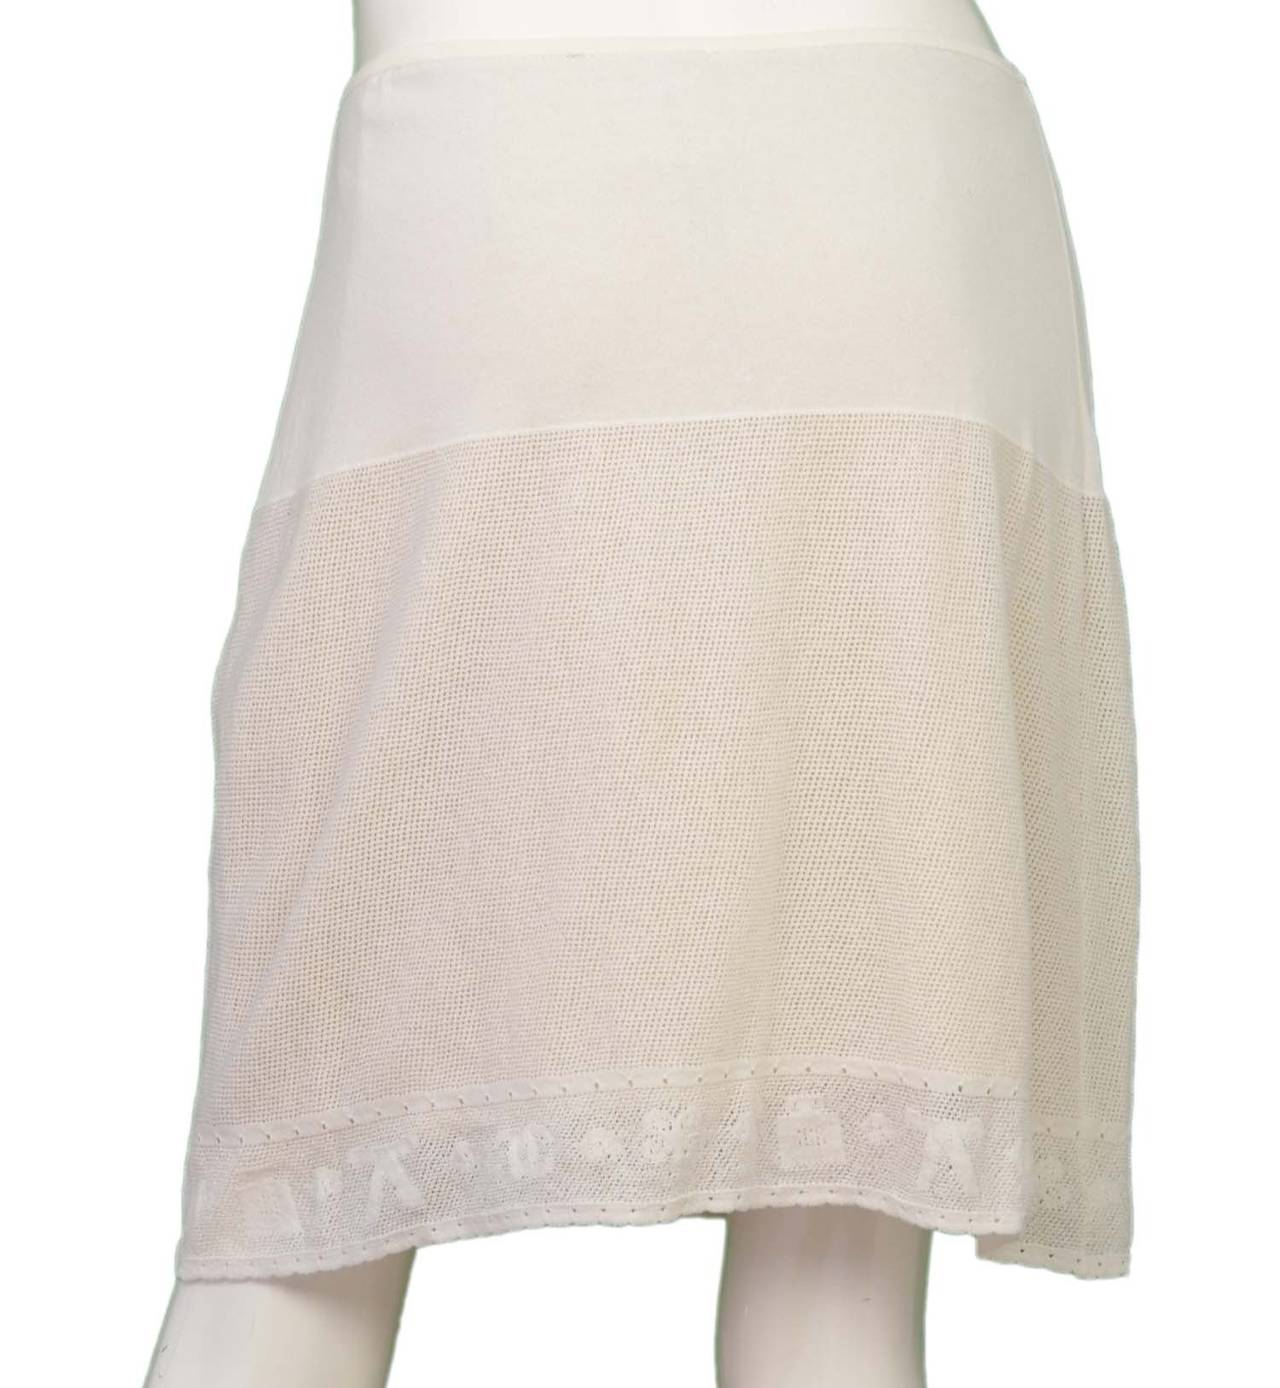 Beige CHANEL 2003 White Perforated Stretch Skirt sz 38